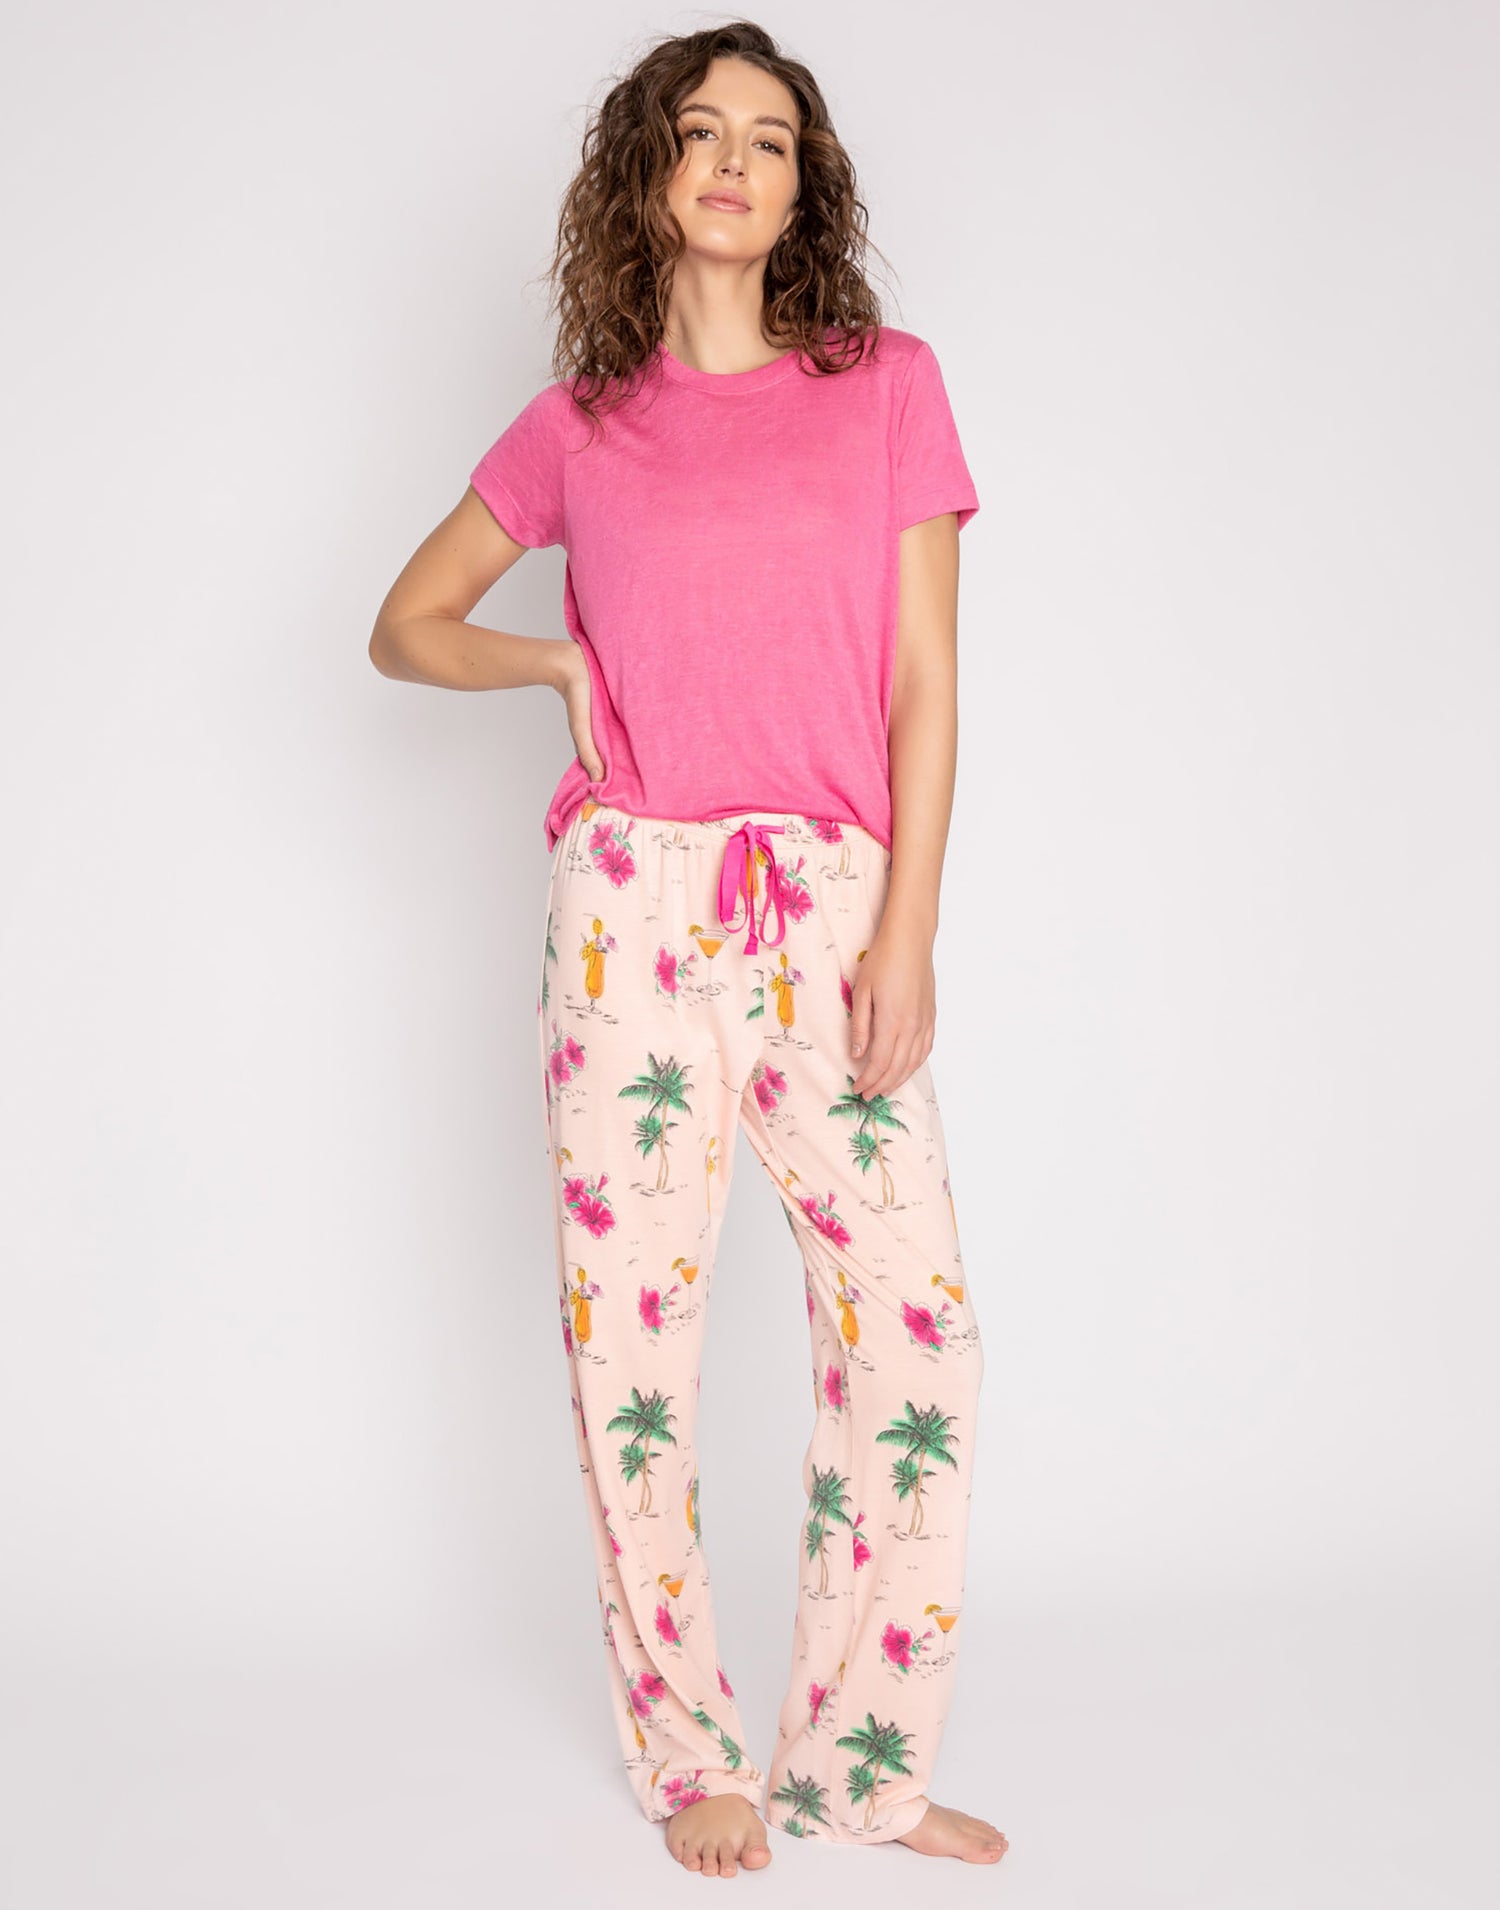 Playful Prints Pant by P.J. Salvage in Pink Dream - Front View